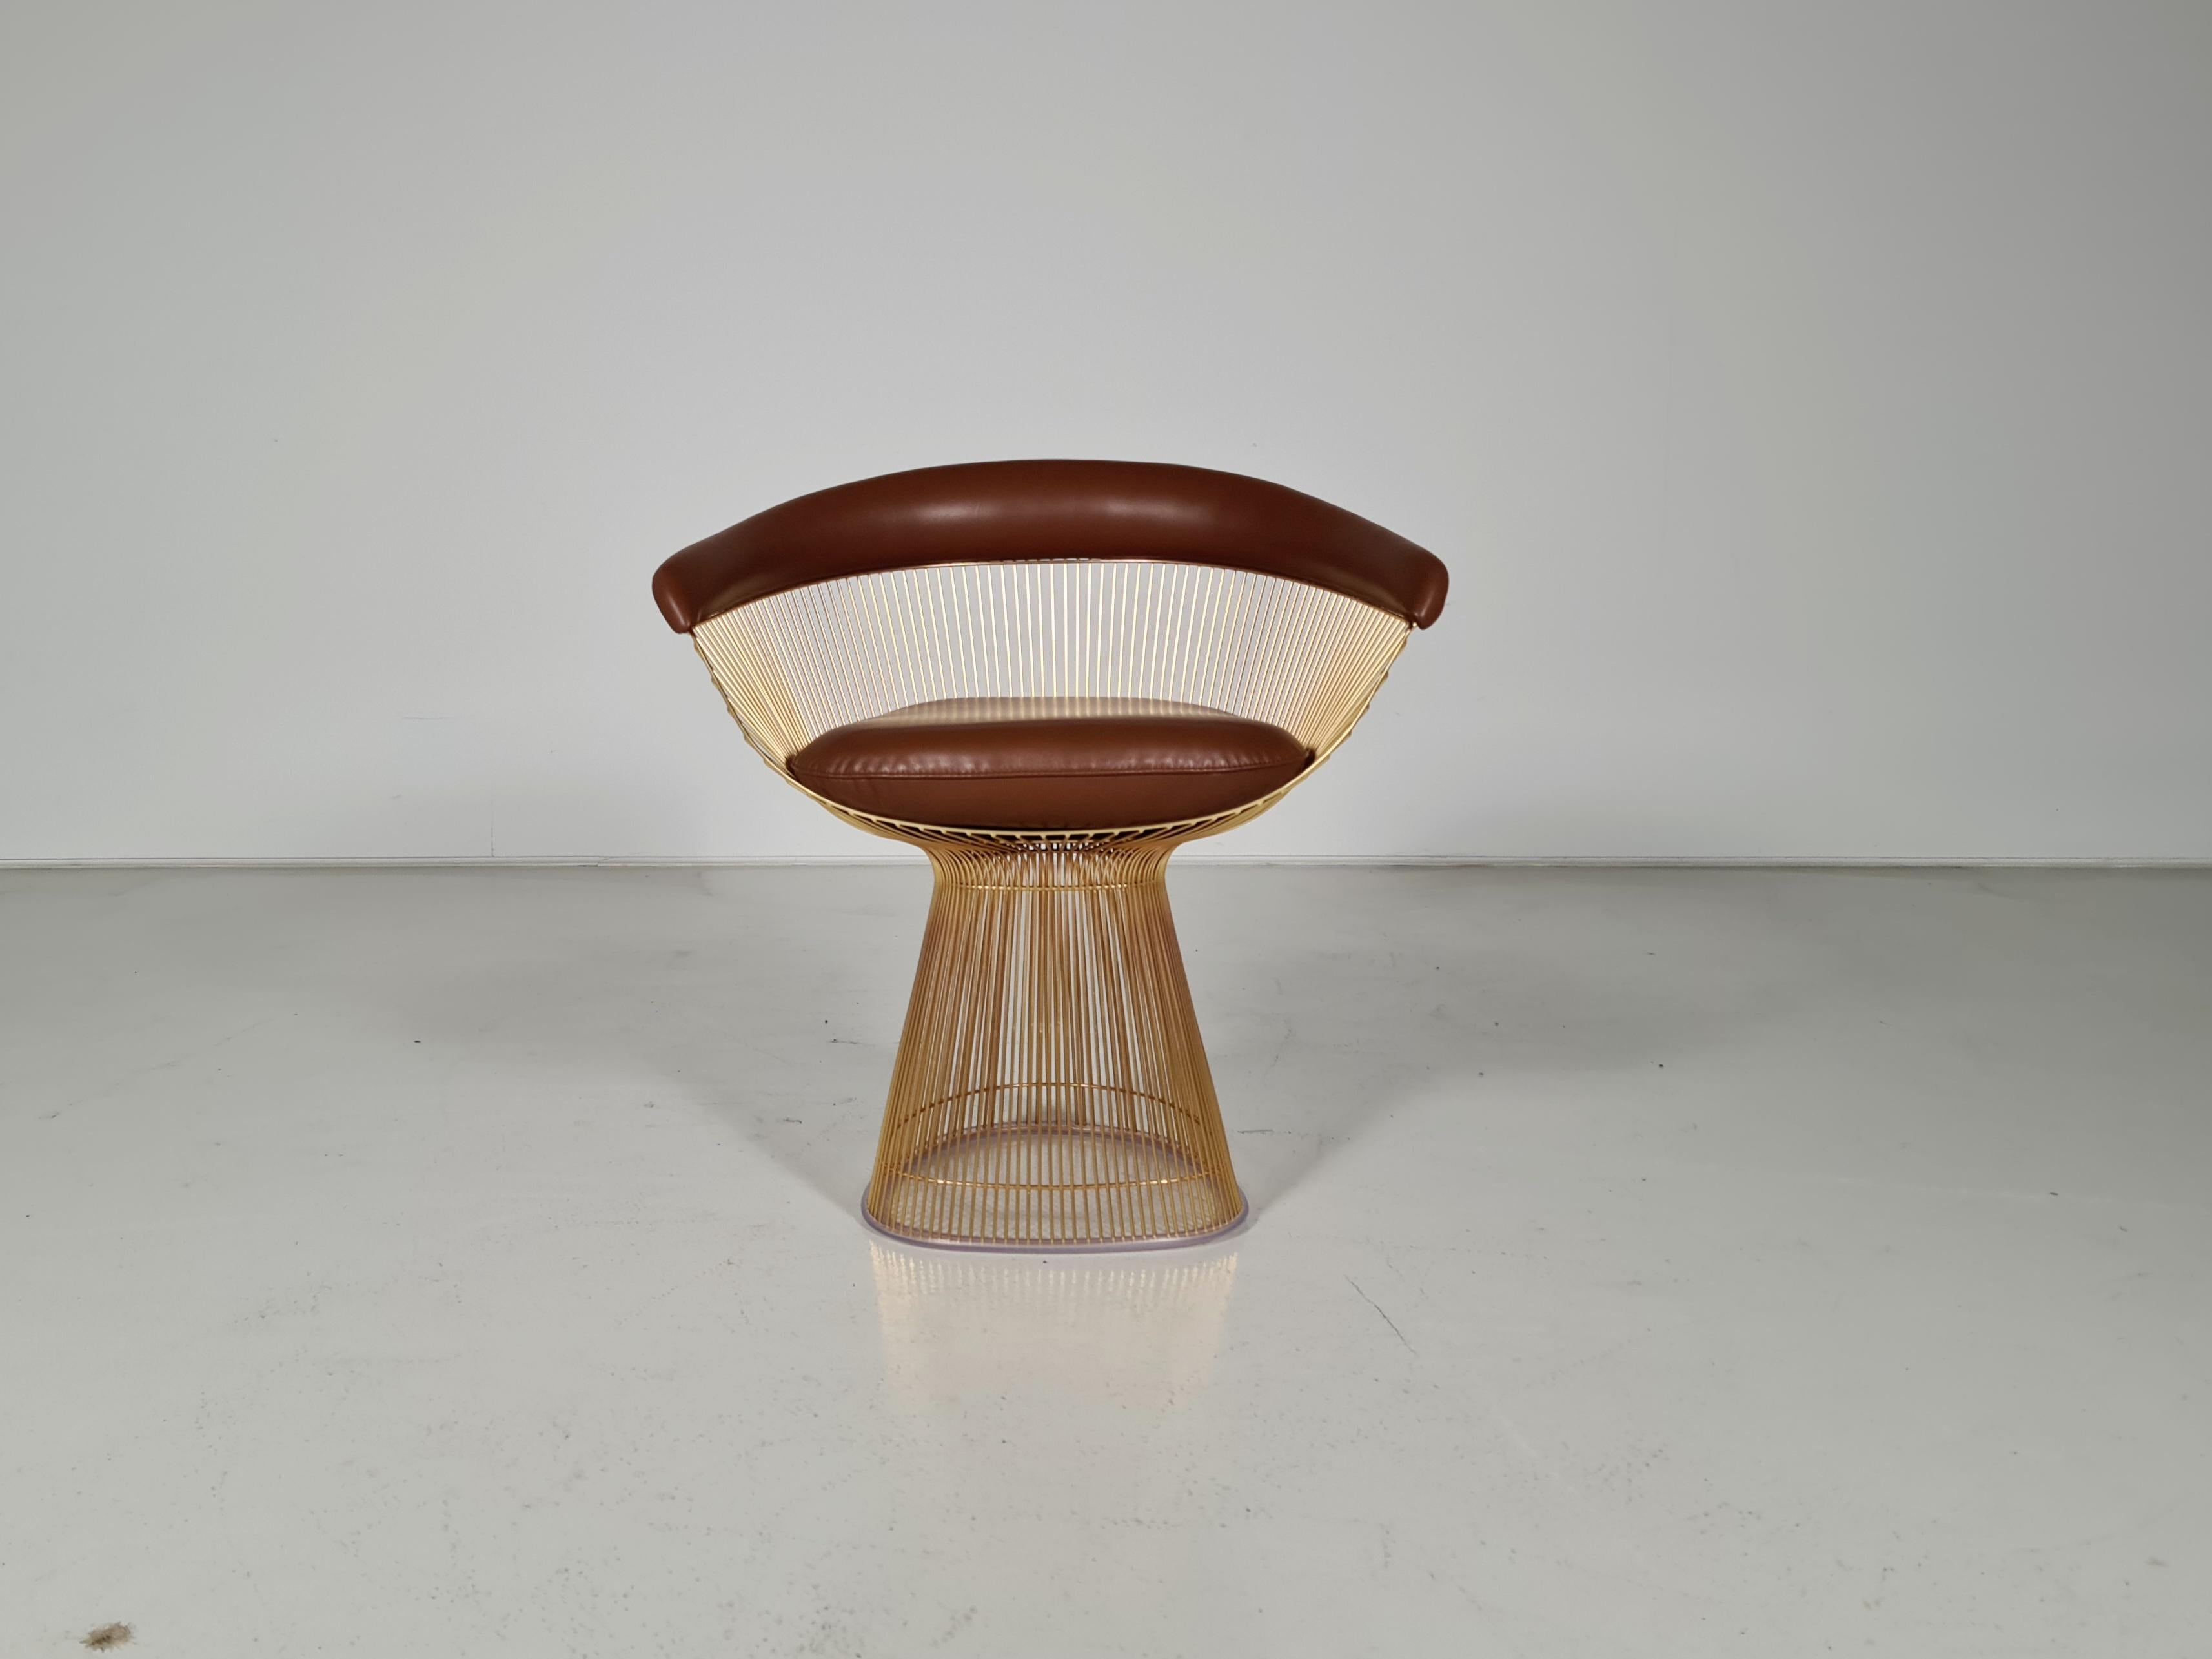 Warren Platner chair, Knol International

In 1966, the Platner Collection captured the “decorative, gentle, graceful” shapes that were beginning to infiltrate the modern vocabulary. The Arm Chair, which can be used as a dining chair or side chair,